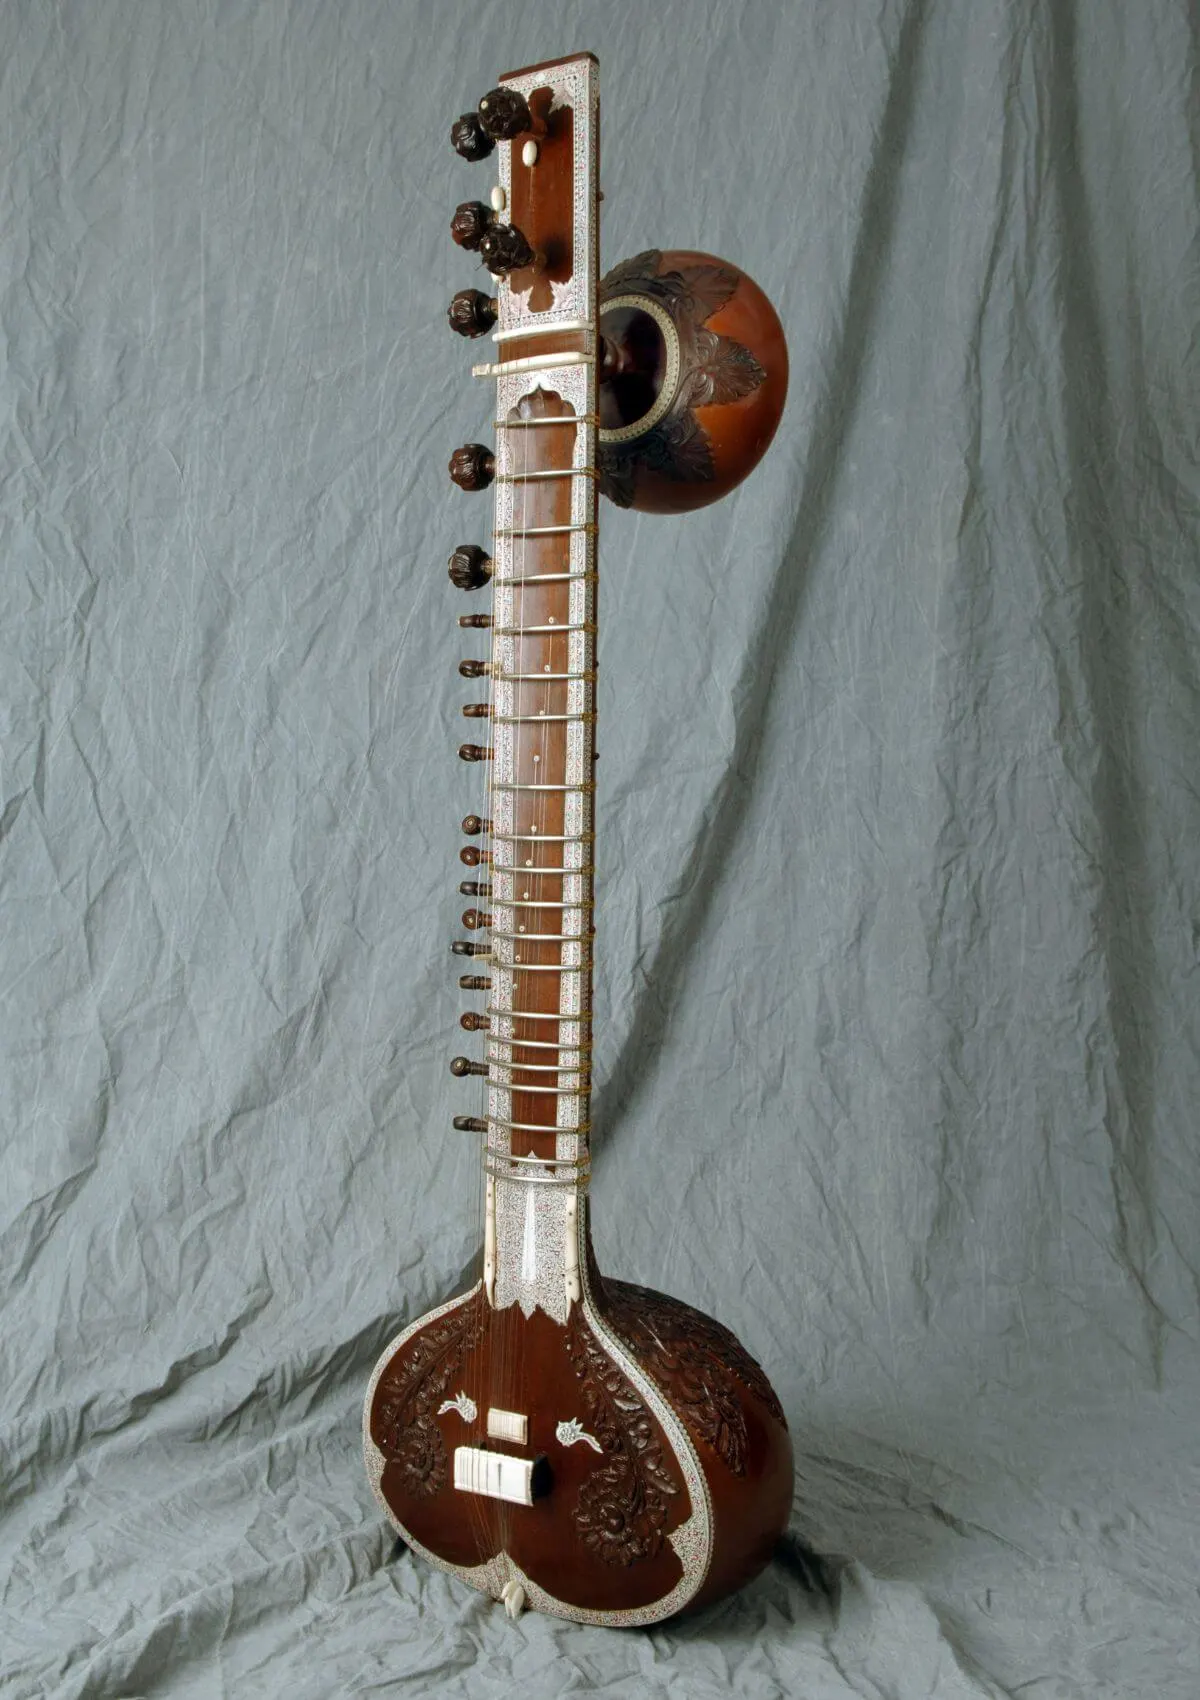 Sitar souvenirs from Nepal